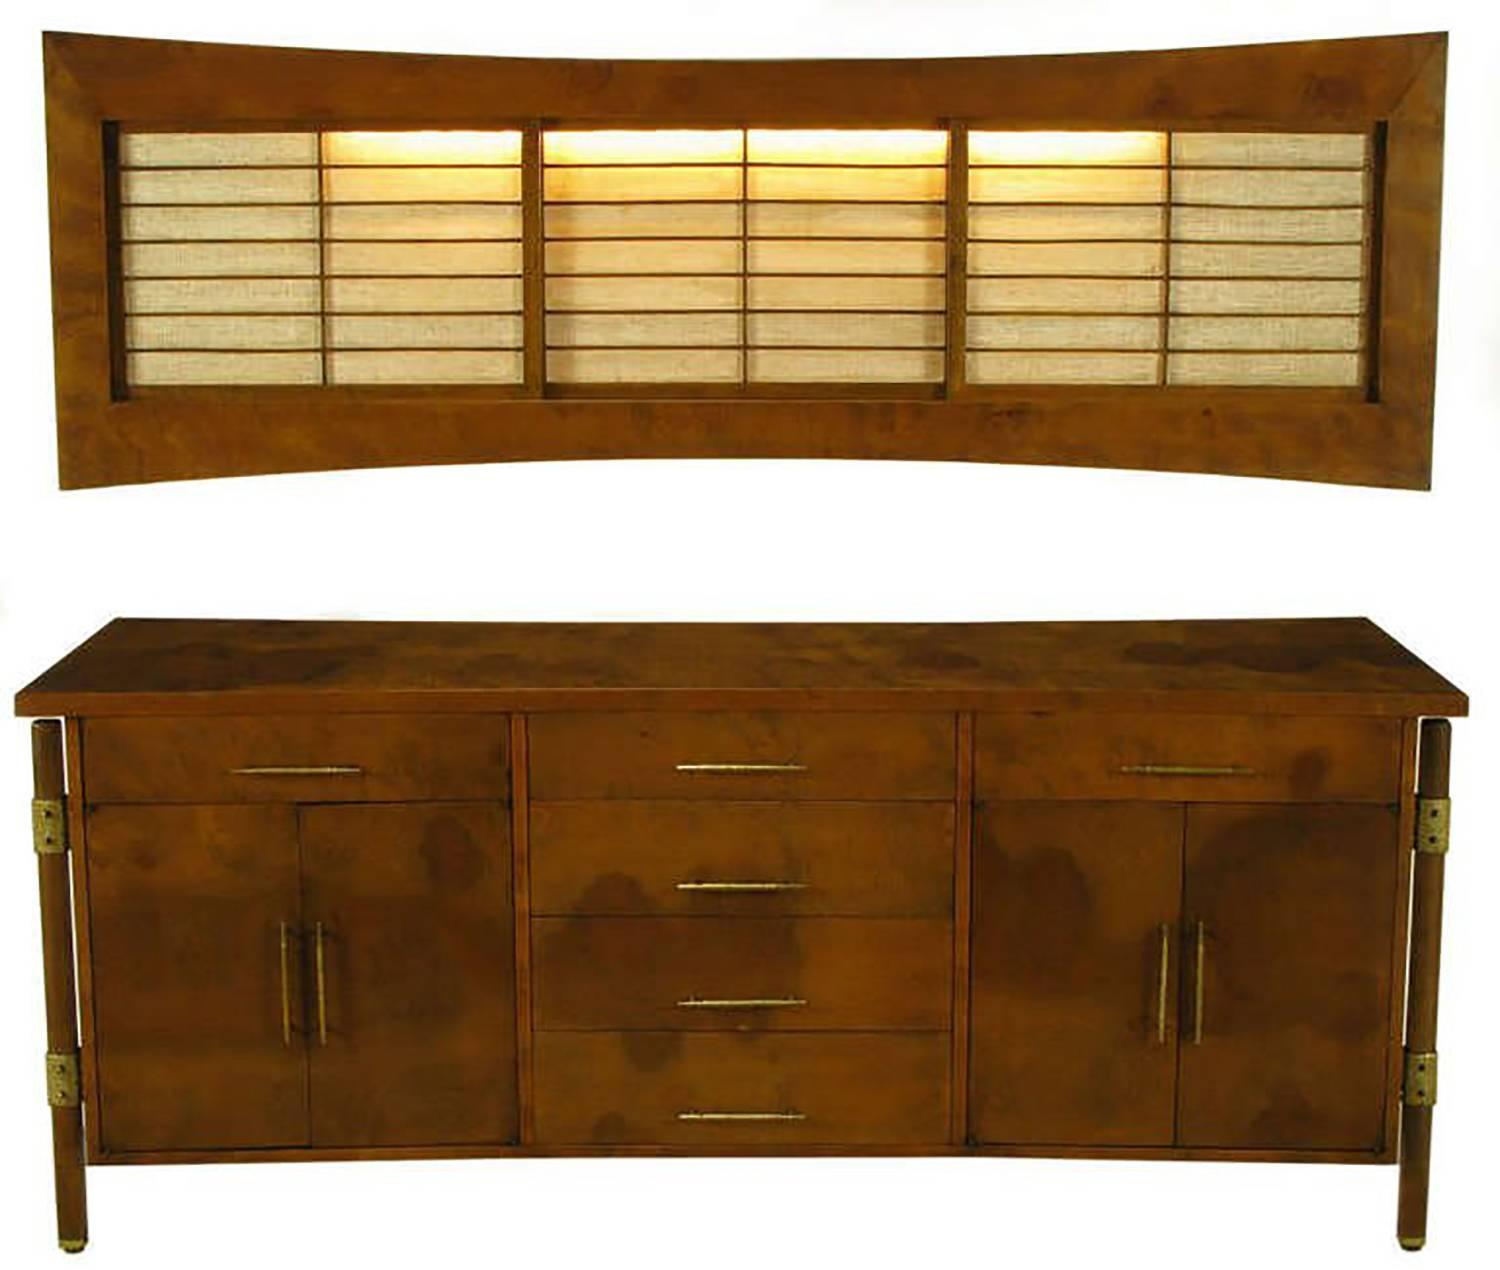 Designed by Harold M. Schwartz for Romweber. Burled walnut side board with fiddle back highlights. Rustic textured brass hardware, including brackets connecting the outboard legs to the case. Sideboard features long pulls on the six drawers and two